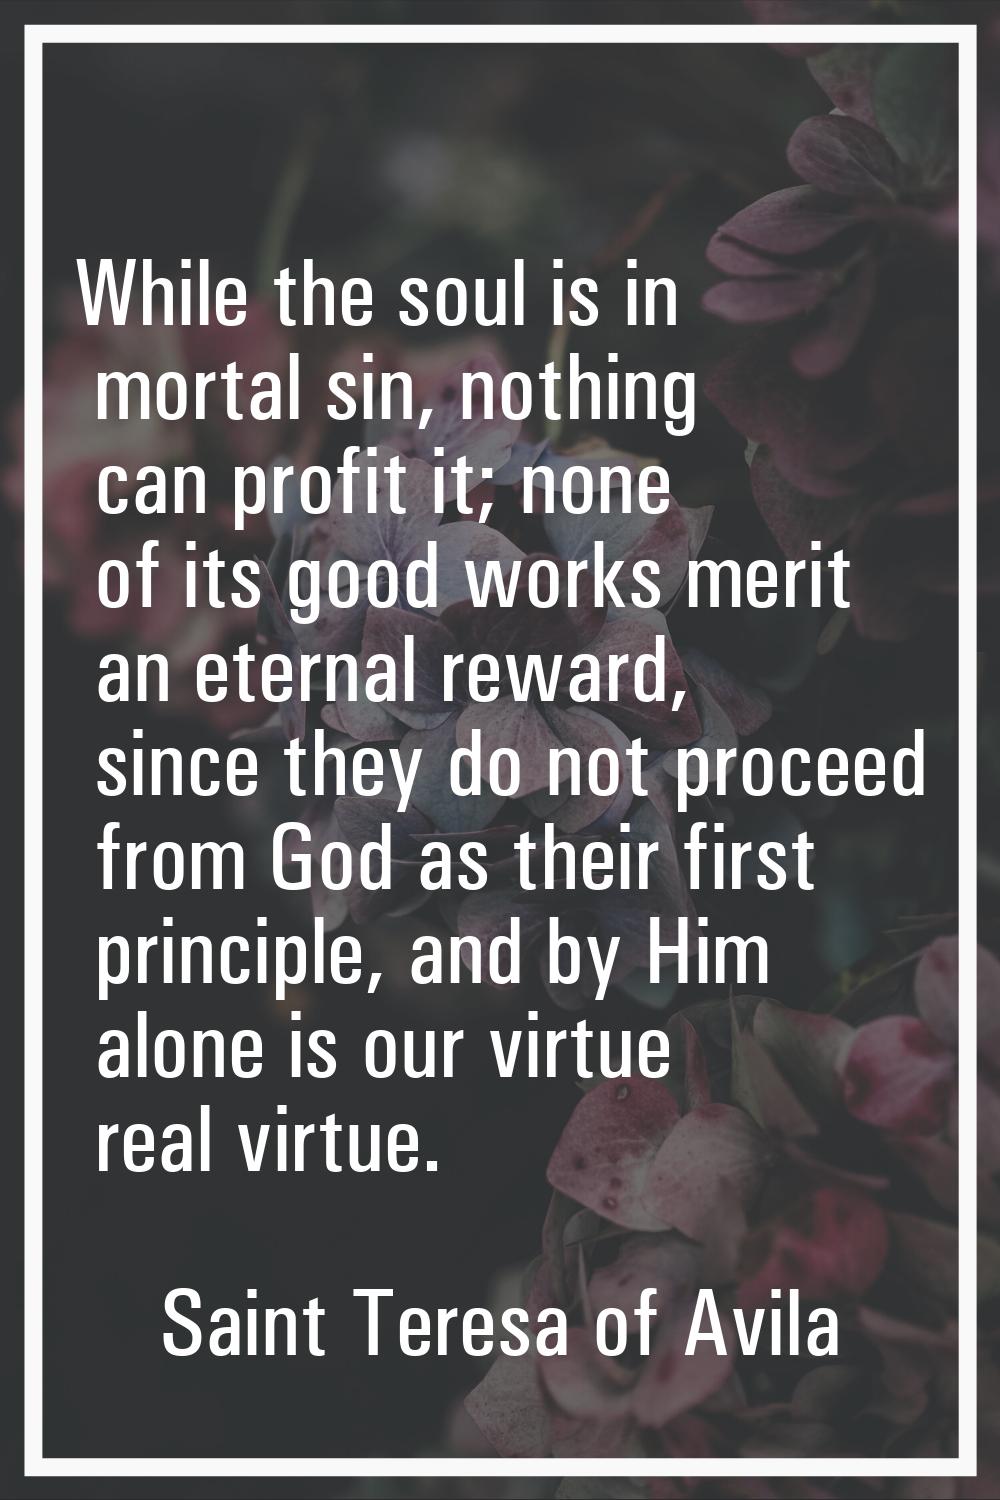 While the soul is in mortal sin, nothing can profit it; none of its good works merit an eternal rew